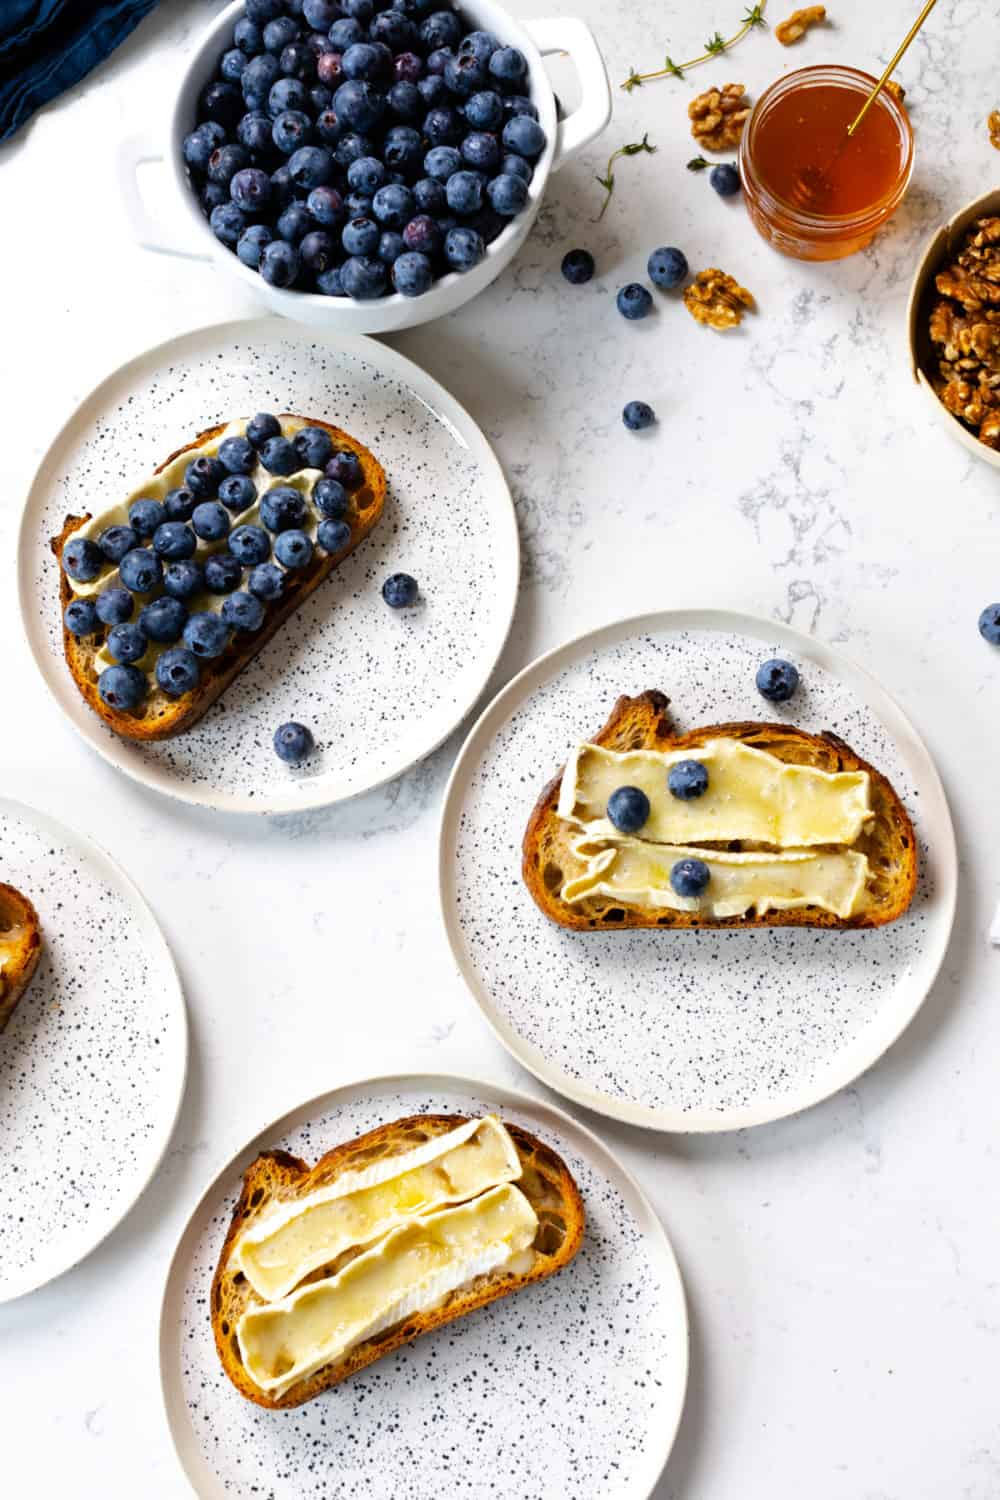 Blueberry Brie Walnut Toasts_Baking the Goods